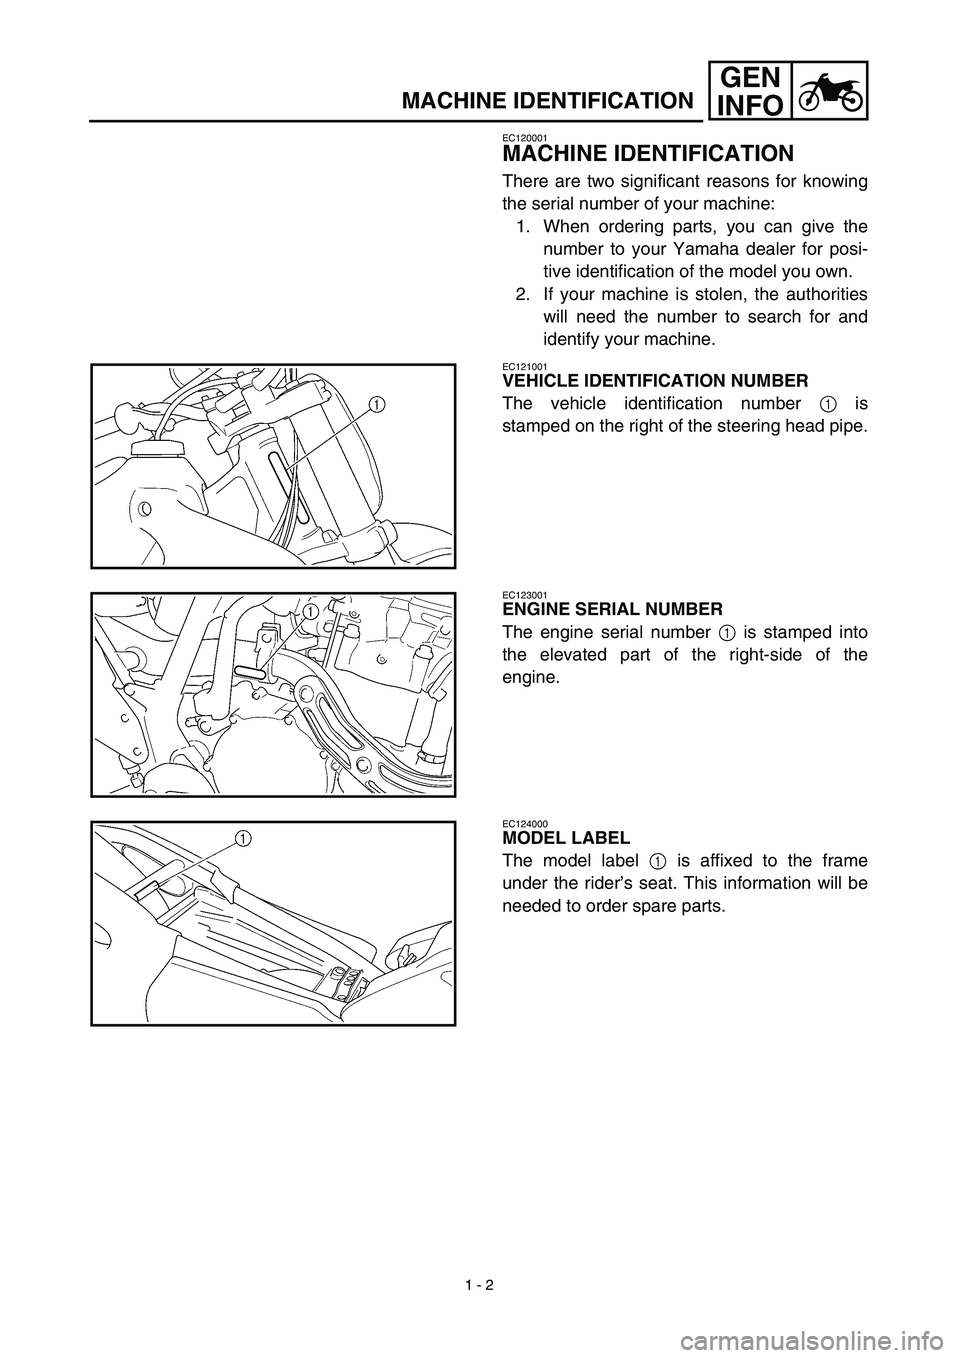 YAMAHA YZ450F 2003 Owners Manual  
1 - 2
GEN
INFO
 
MACHINE IDENTIFICATION 
EC120001 
MACHINE IDENTIFICATION 
There are two significant reasons for knowing
the serial number of your machine:
1. When ordering parts, you can give the
n